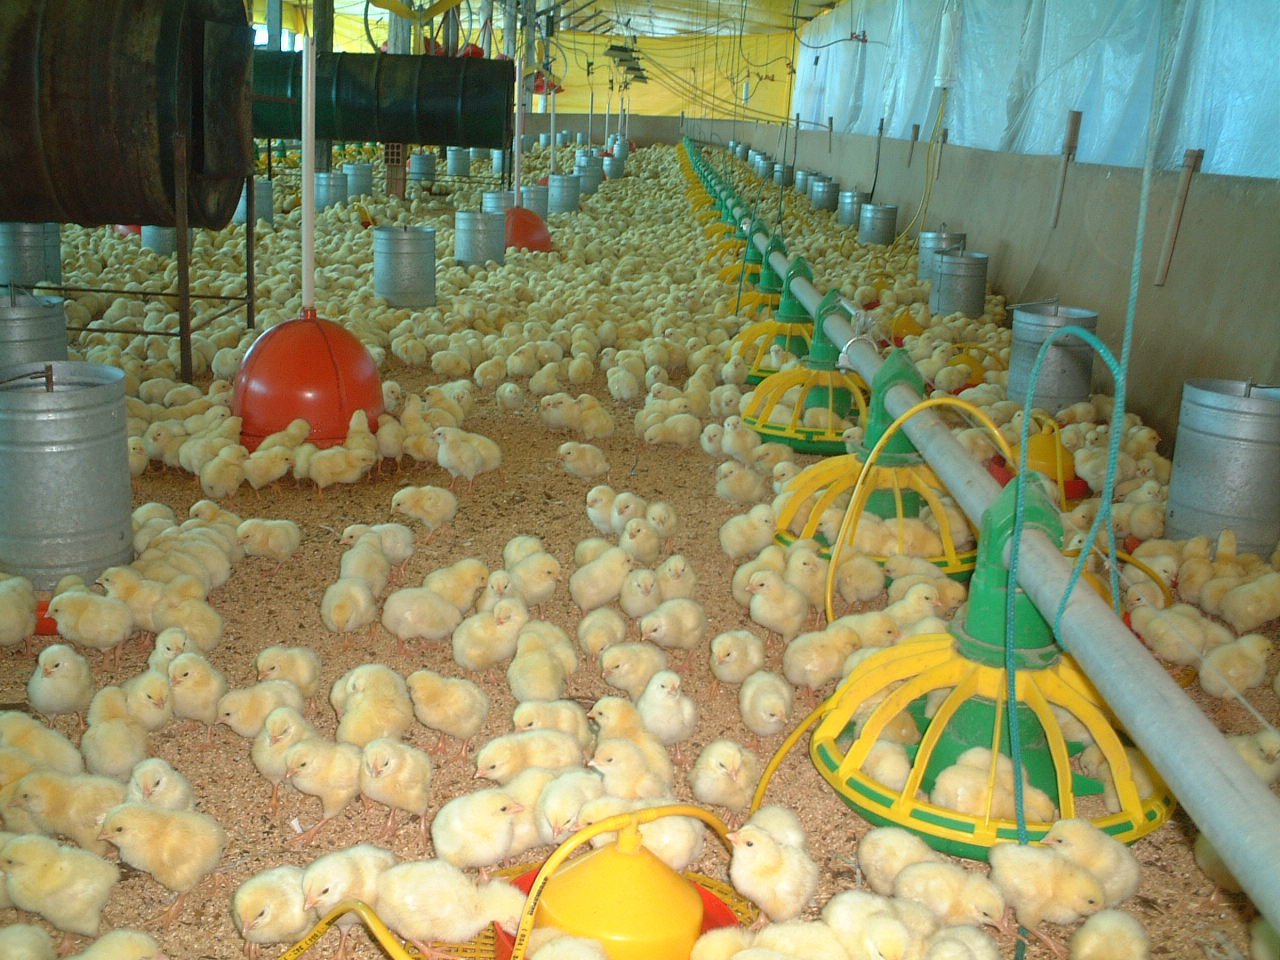 the poultry is inside of a building covered in eggs